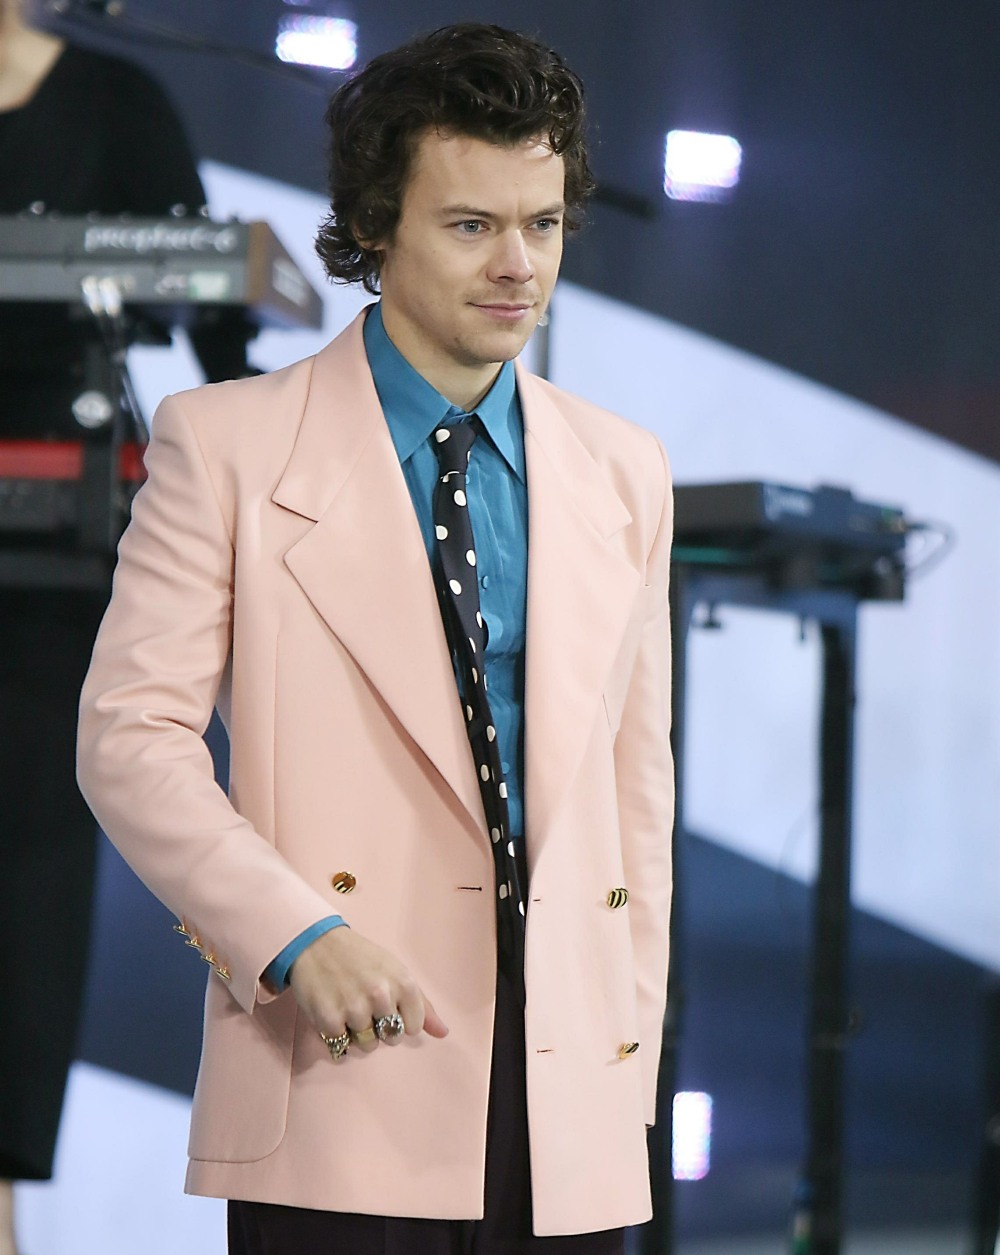 Harry Styles performs during the Today Show Concert Series